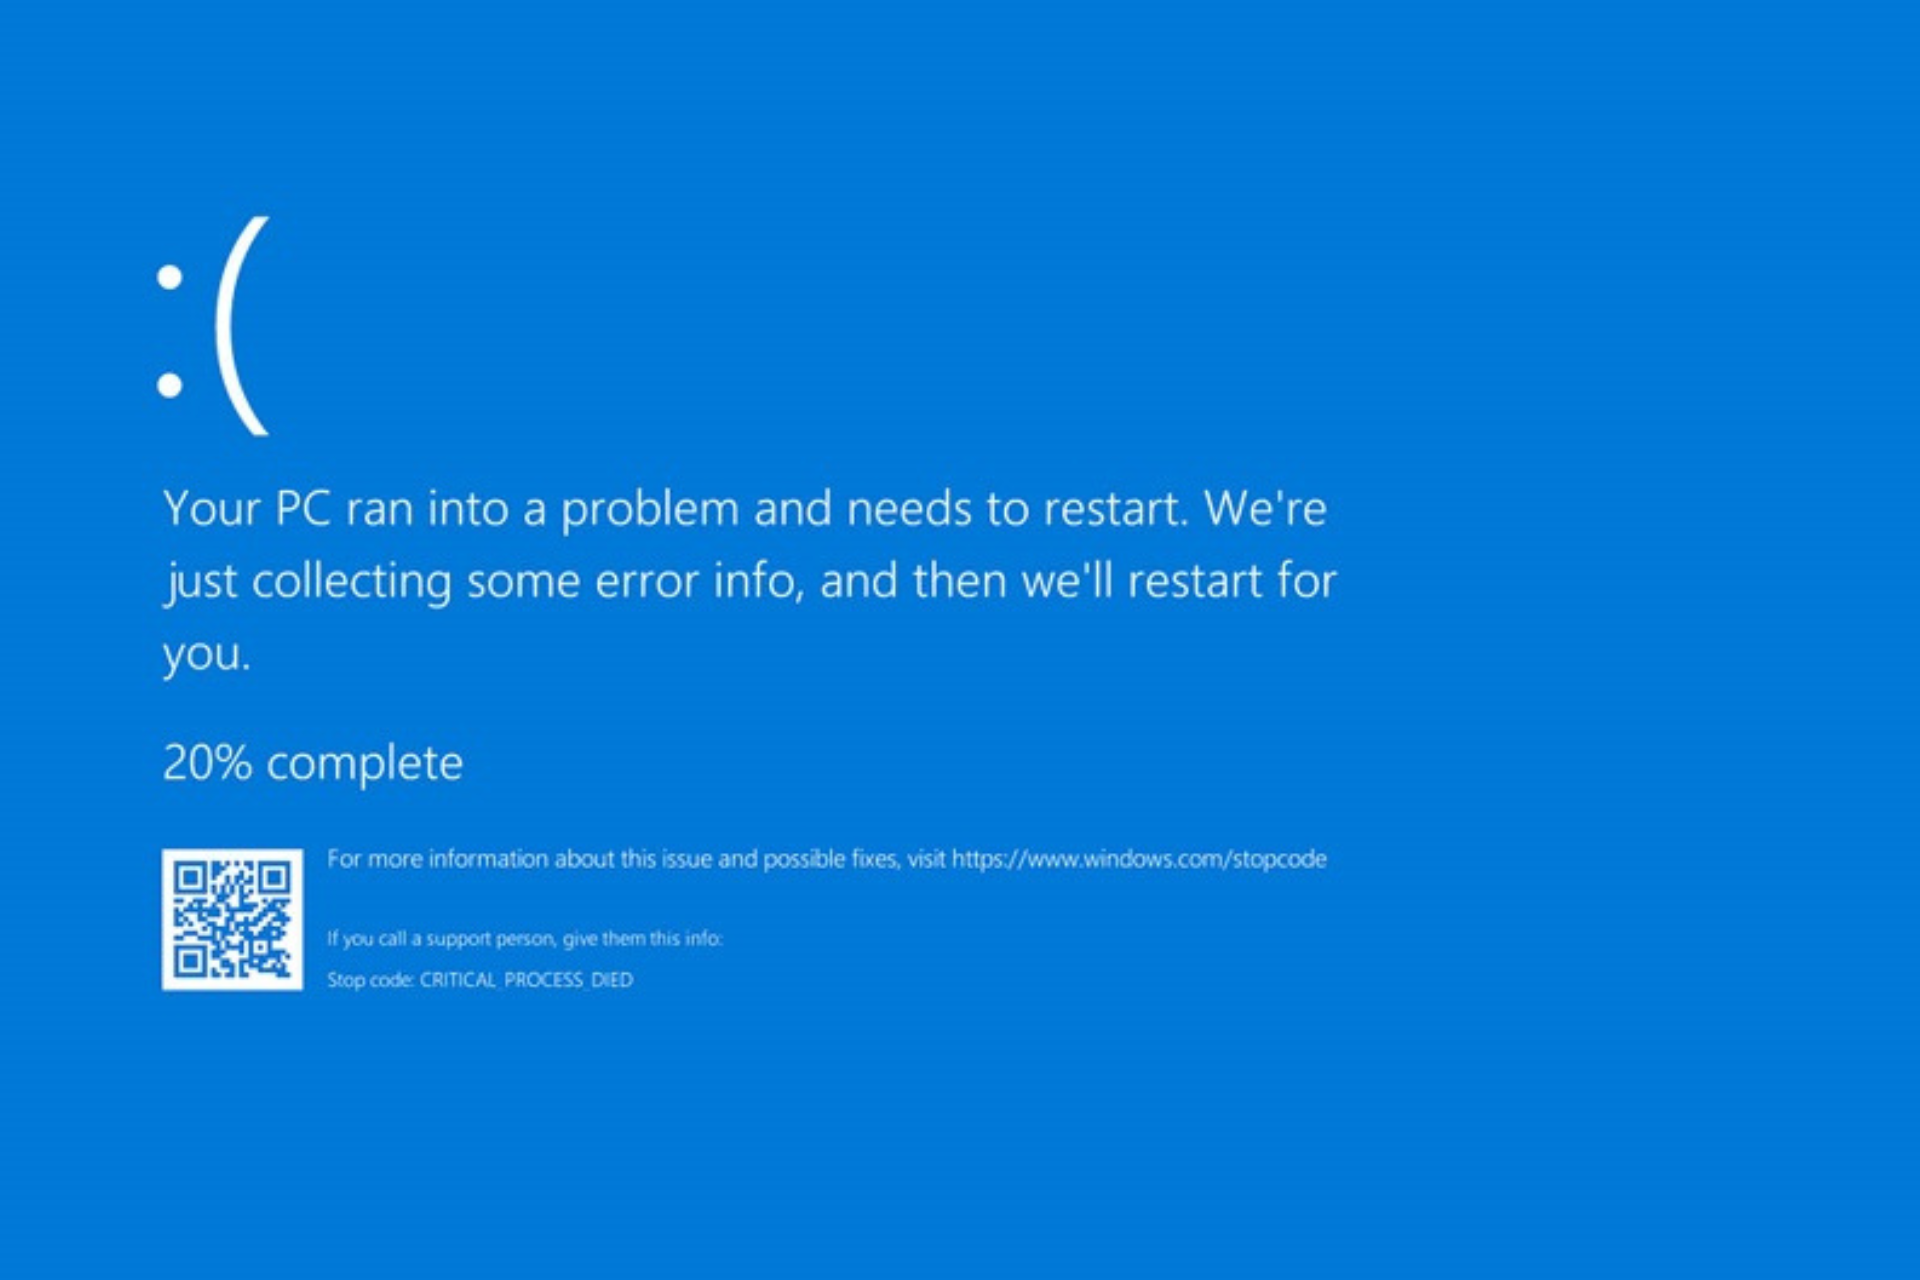 Clipsp.sys How to Fix This BSOD Error on Windows 10 & 11